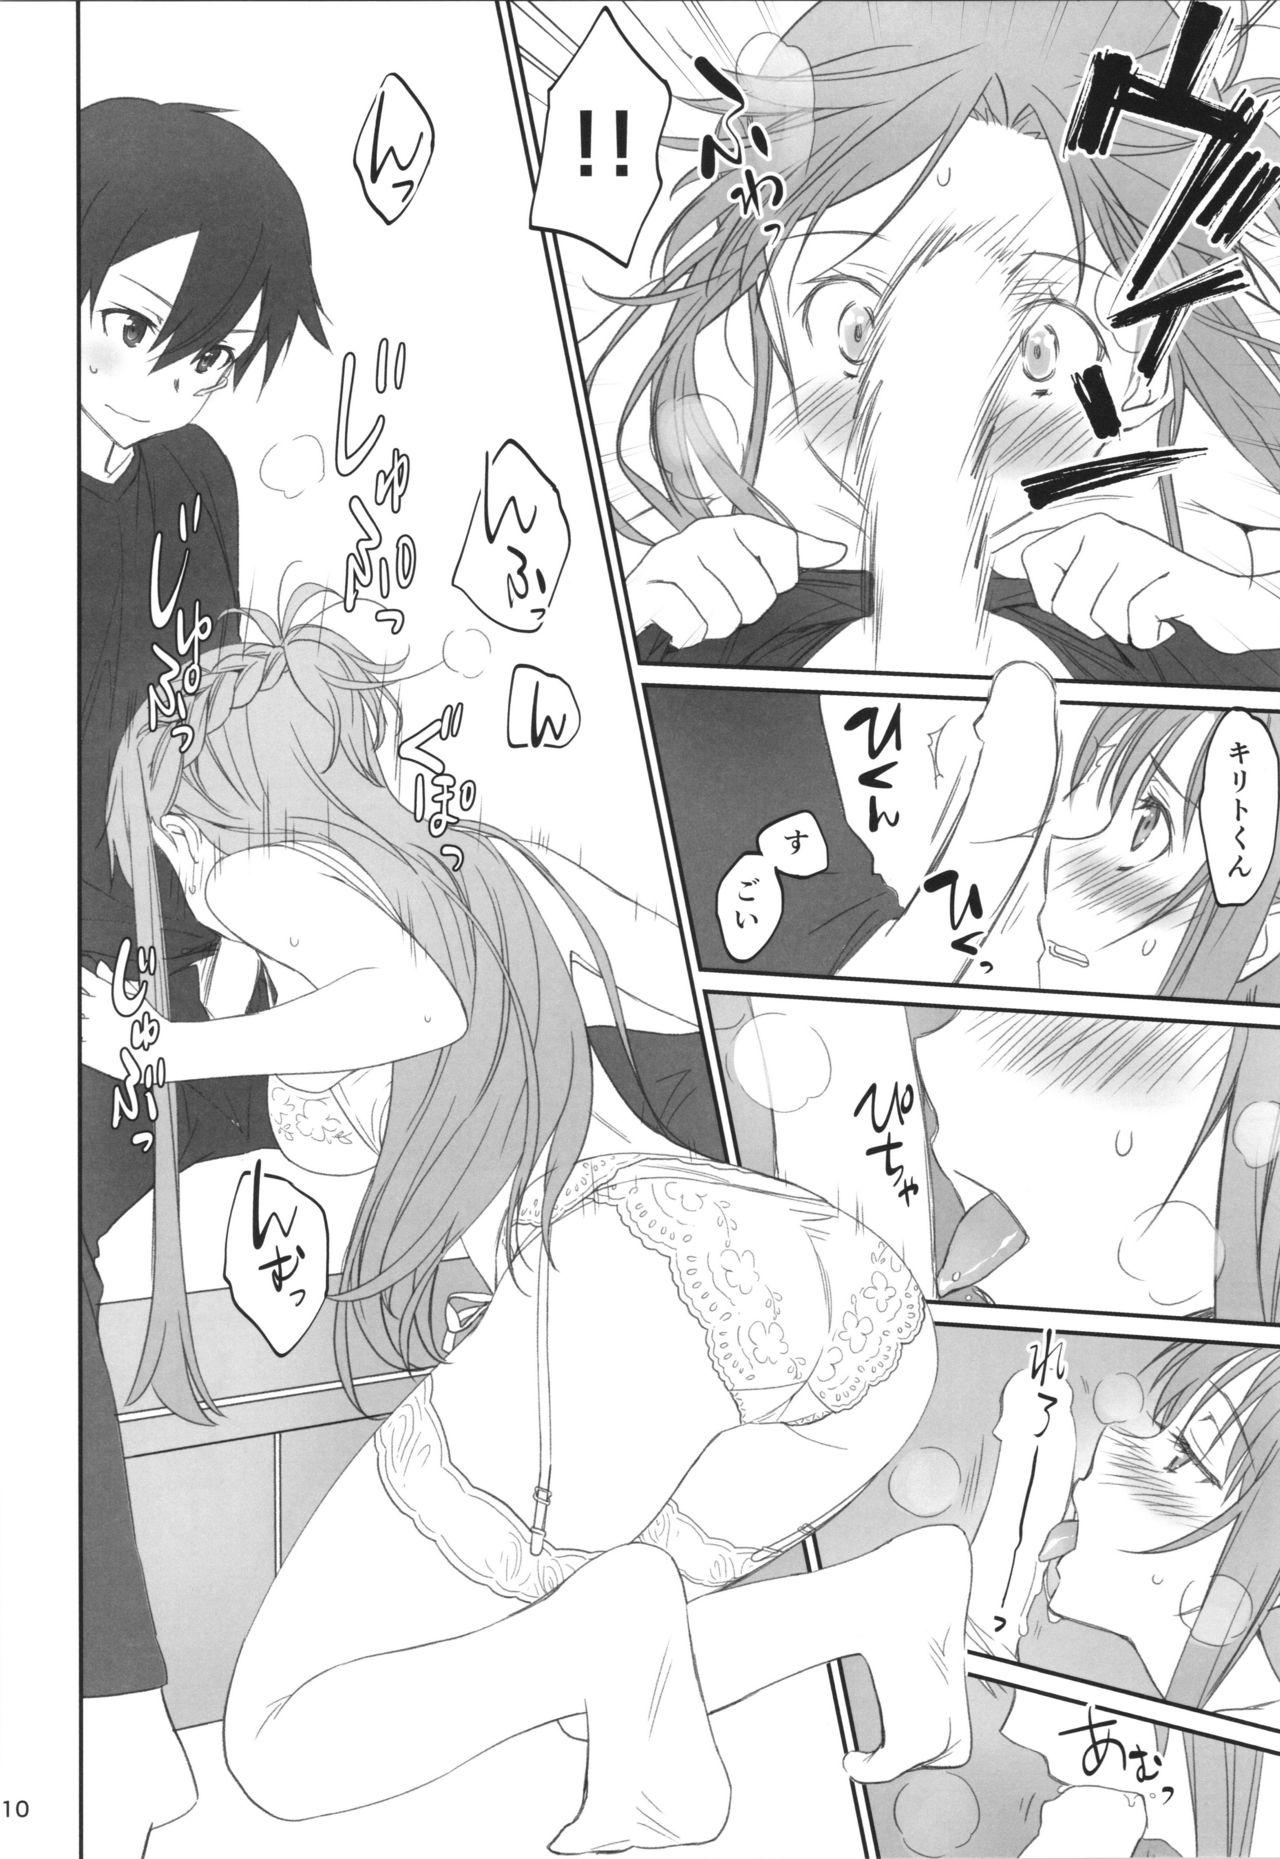 Parties Voyeuristic Disorder - Sword art online Anal - Page 9